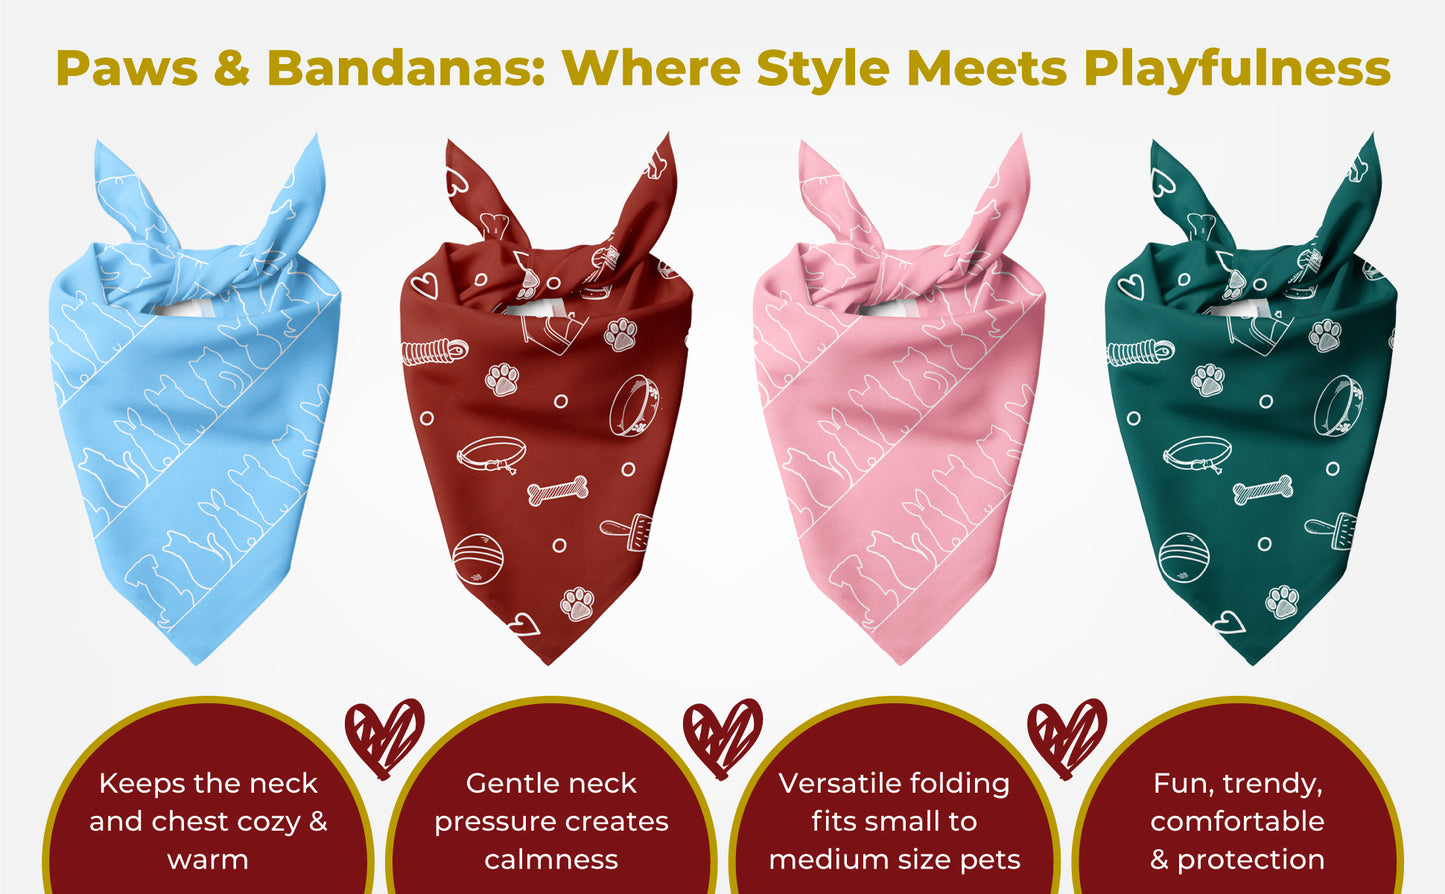 red bandana pink scarf blue outfit green clothes for pet dog puppy girl boy car bunny hamster must have gifts ideas pet classy amazon find gifts new puppy kitten family pet wter bottle summer running walking accessories dog stuffs cute supplies Pet owner gifts Accessories bandanas mom gifts pet supplies large dogs teething toy balls doggie doggo specials essentials bandana near me dog scarf cool dog  bandana for dogs where to buy bandanas for sale